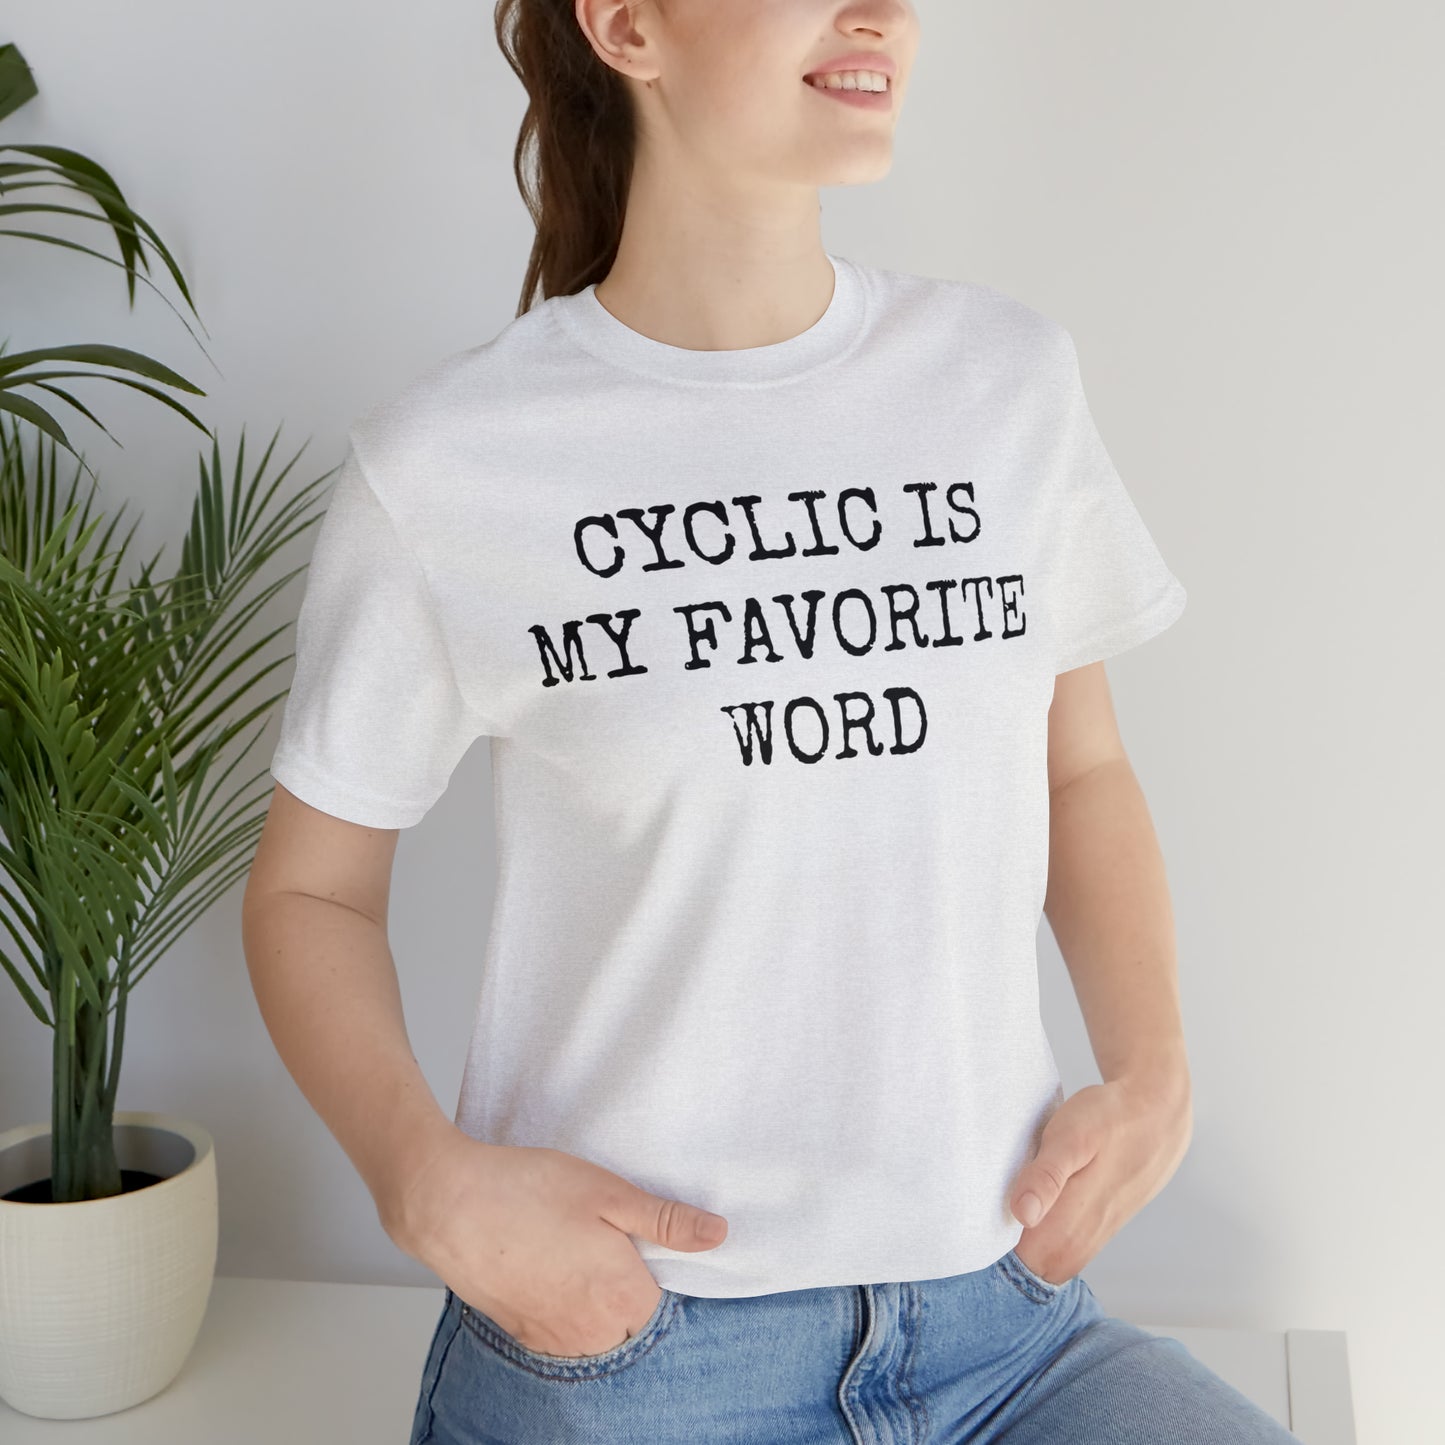 Cyclic Is My Favorite Word